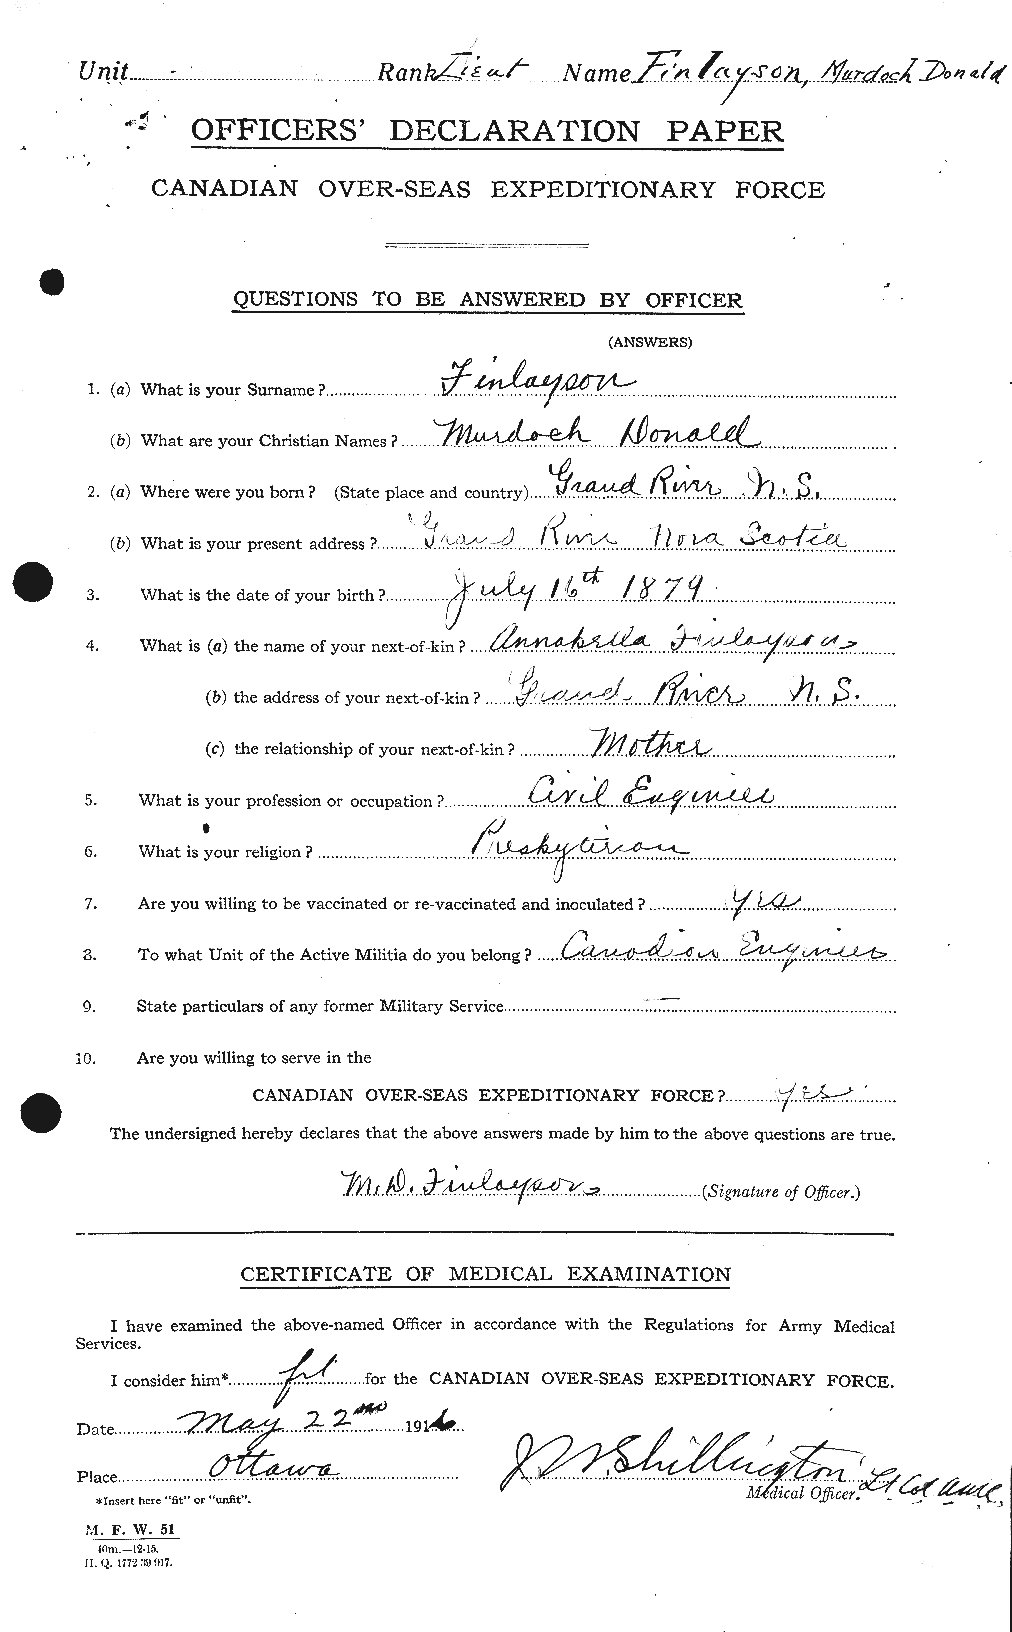 Personnel Records of the First World War - CEF 324192a